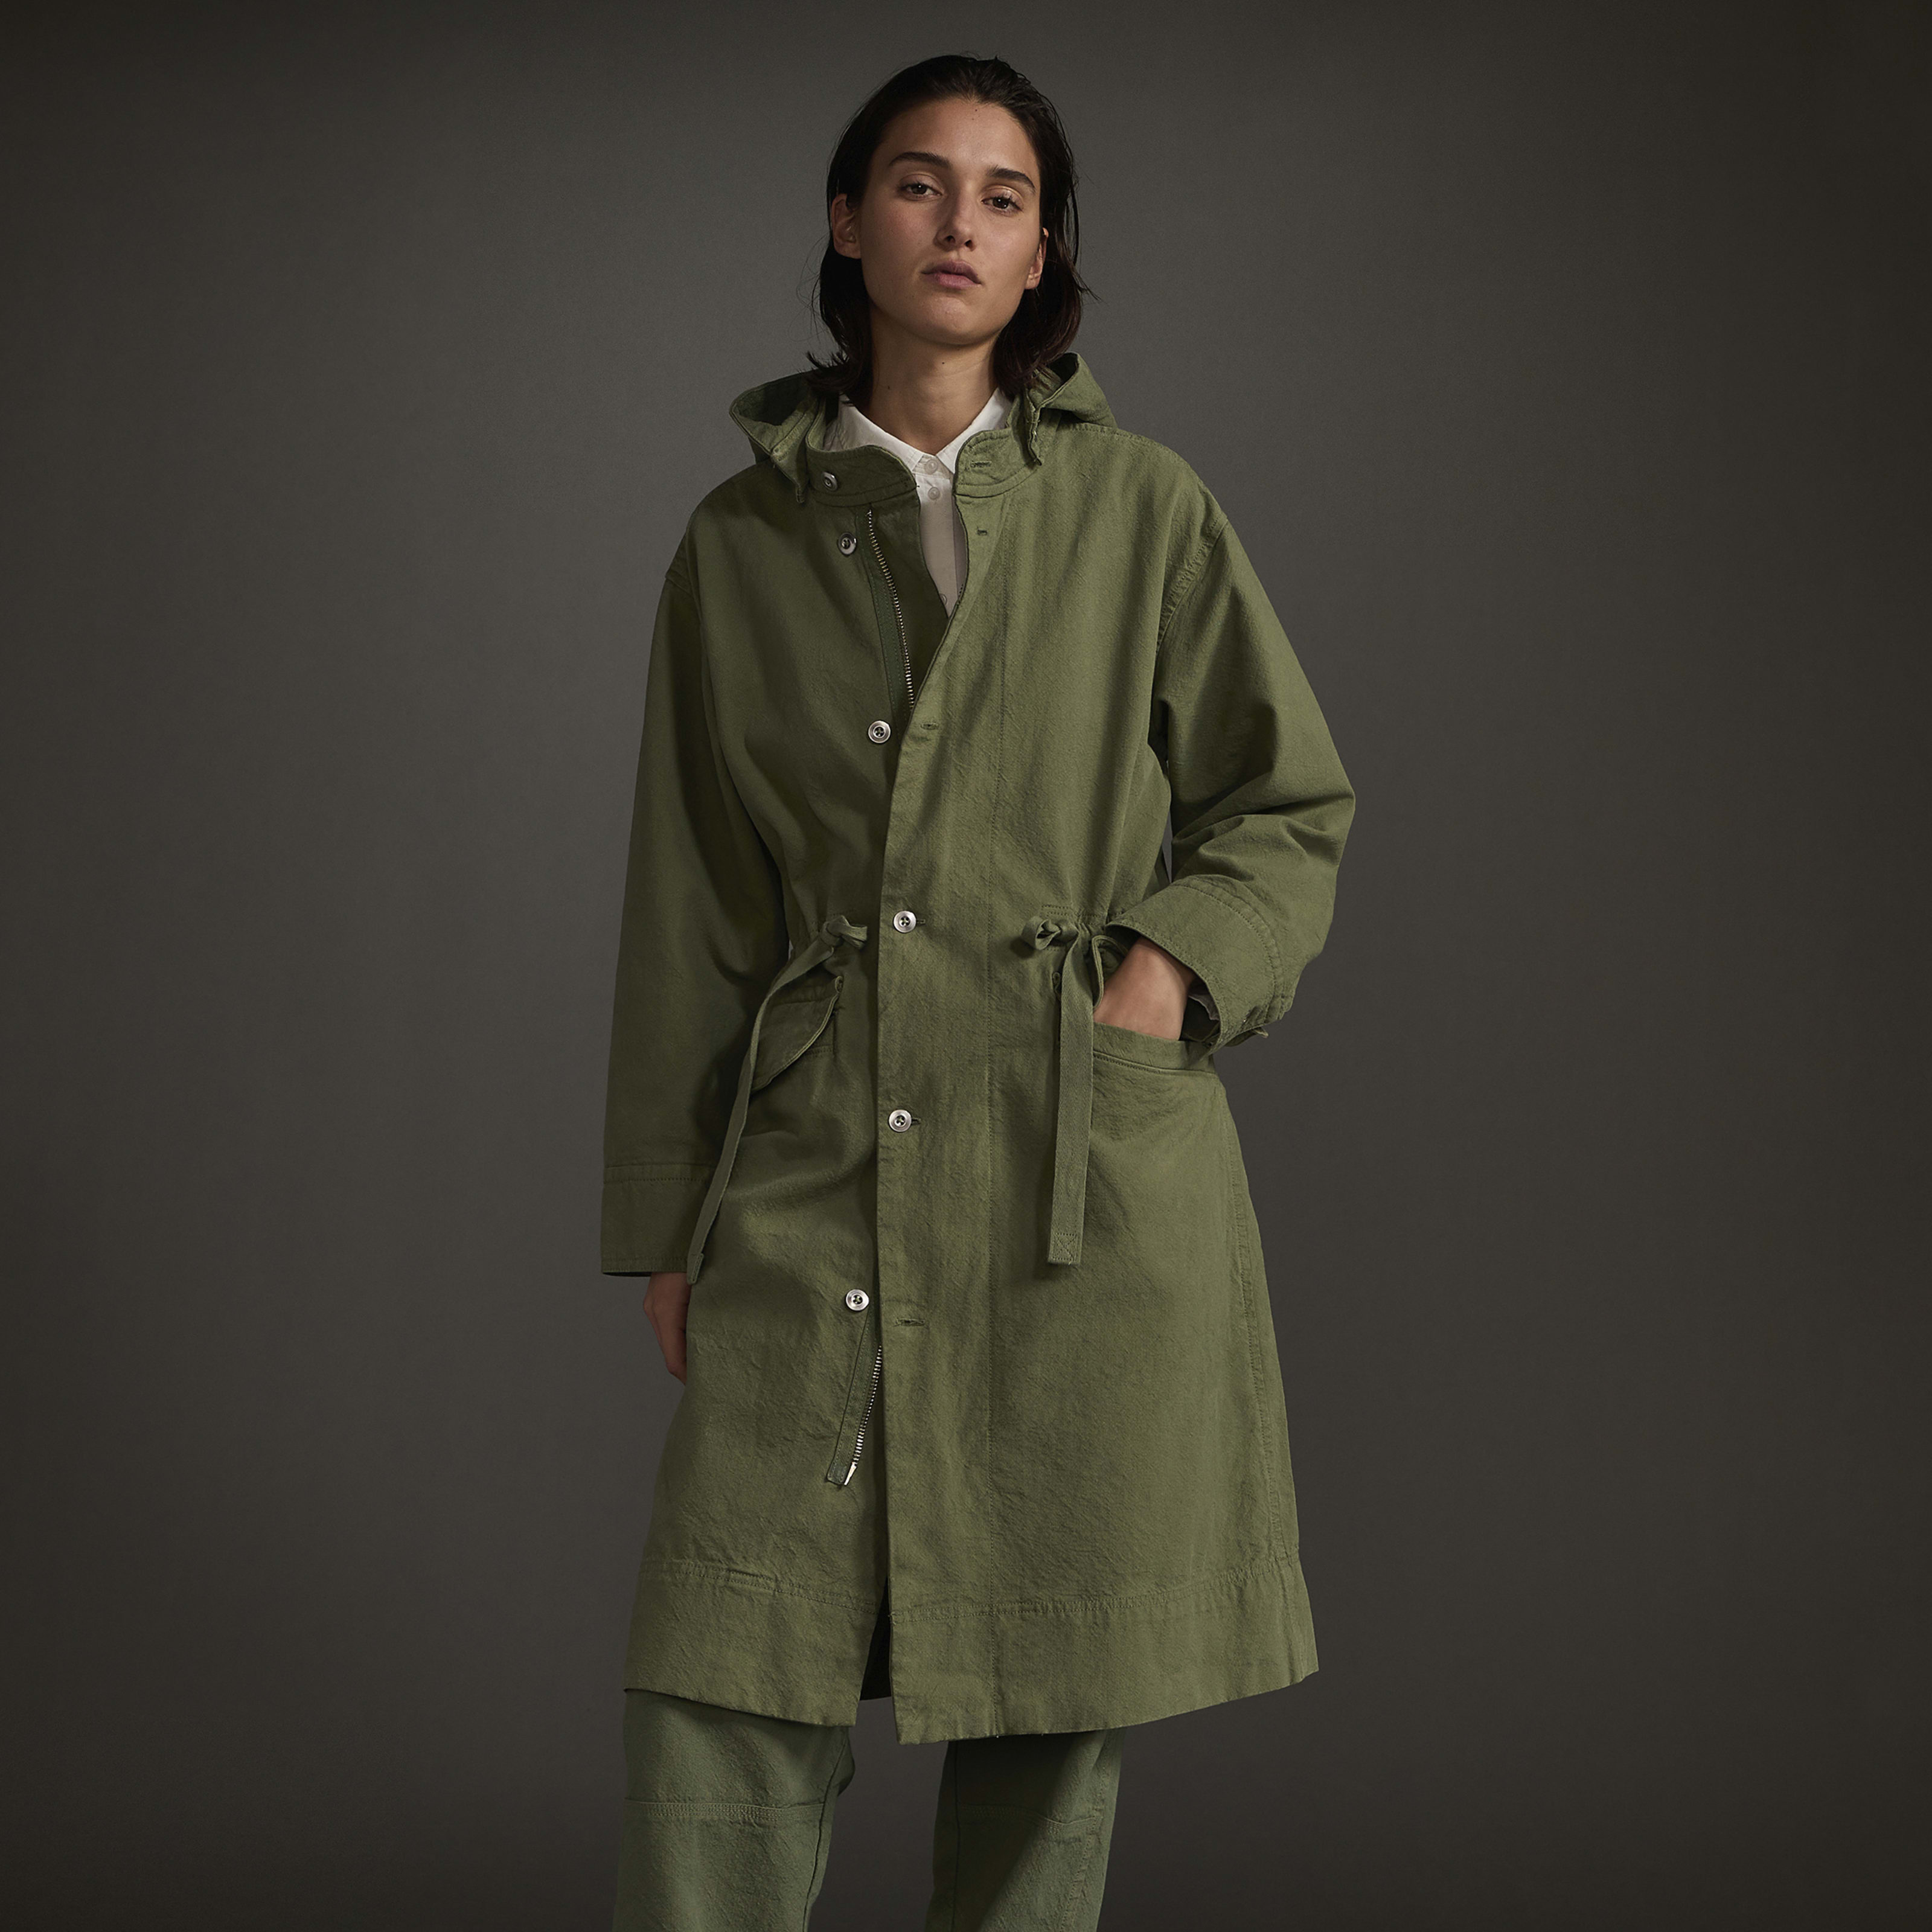 women's canvas organic cotton parka by everlane in forest green, size xxs